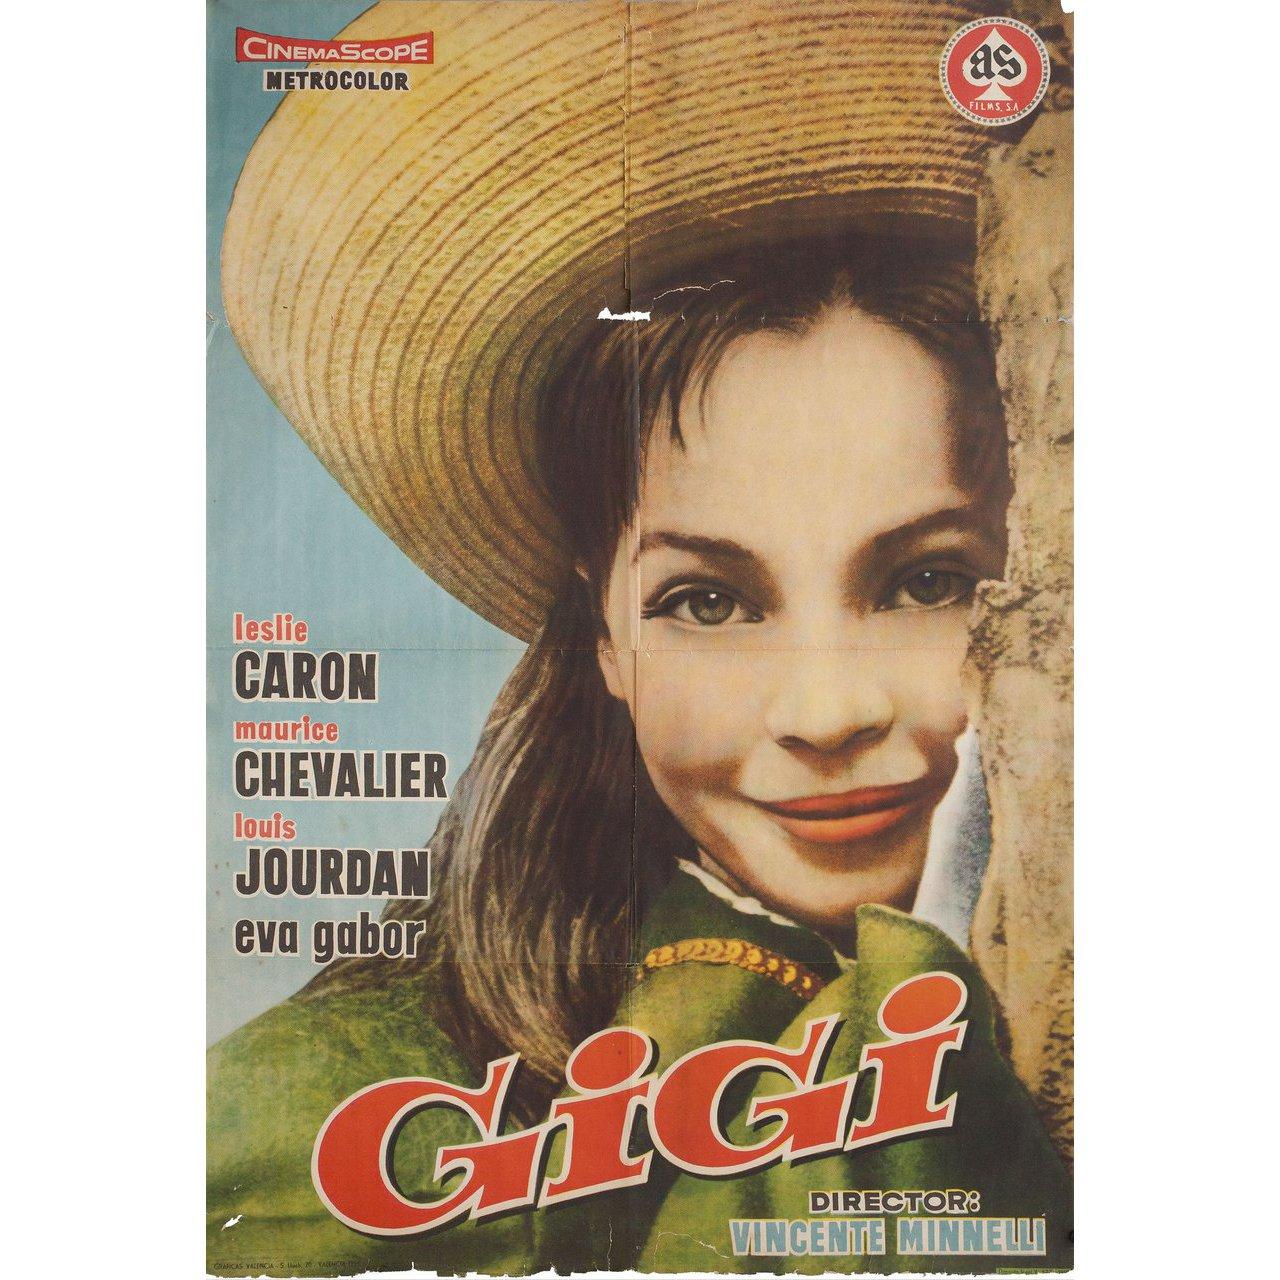 Original 1959 Spanish B1 poster for the film Gigi directed by Vincente Minnelli with Leslie Caron / Maurice Chevalier / Louis Jourdan / Hermione Gingold. Fair-good condition, folded. Many original posters were issued folded or were subsequently